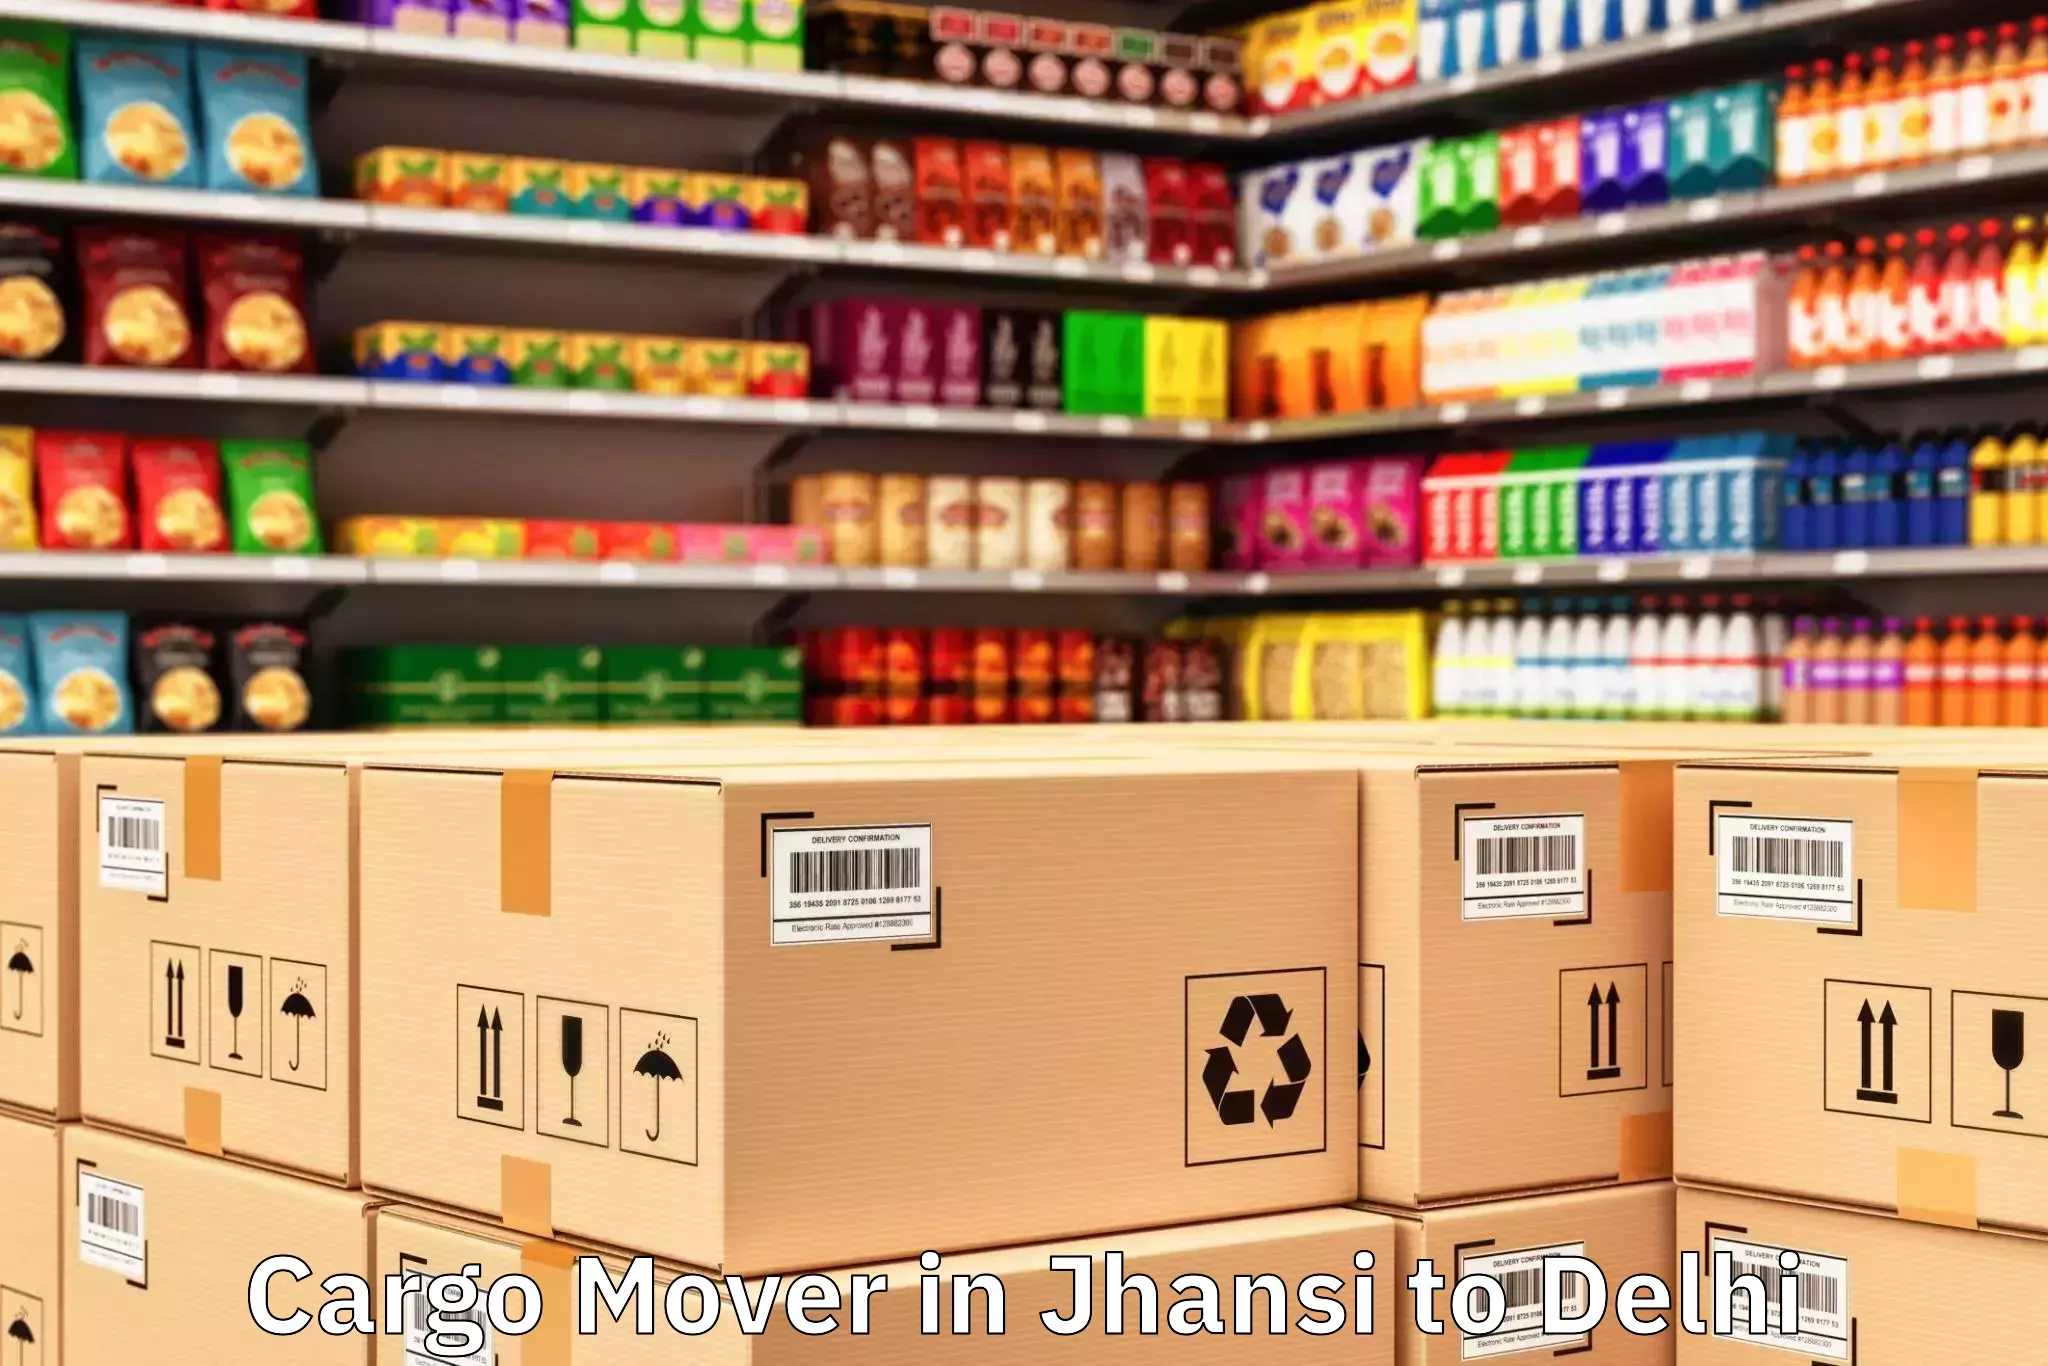 Expert Jhansi to V3s East Centre Mall Cargo Mover